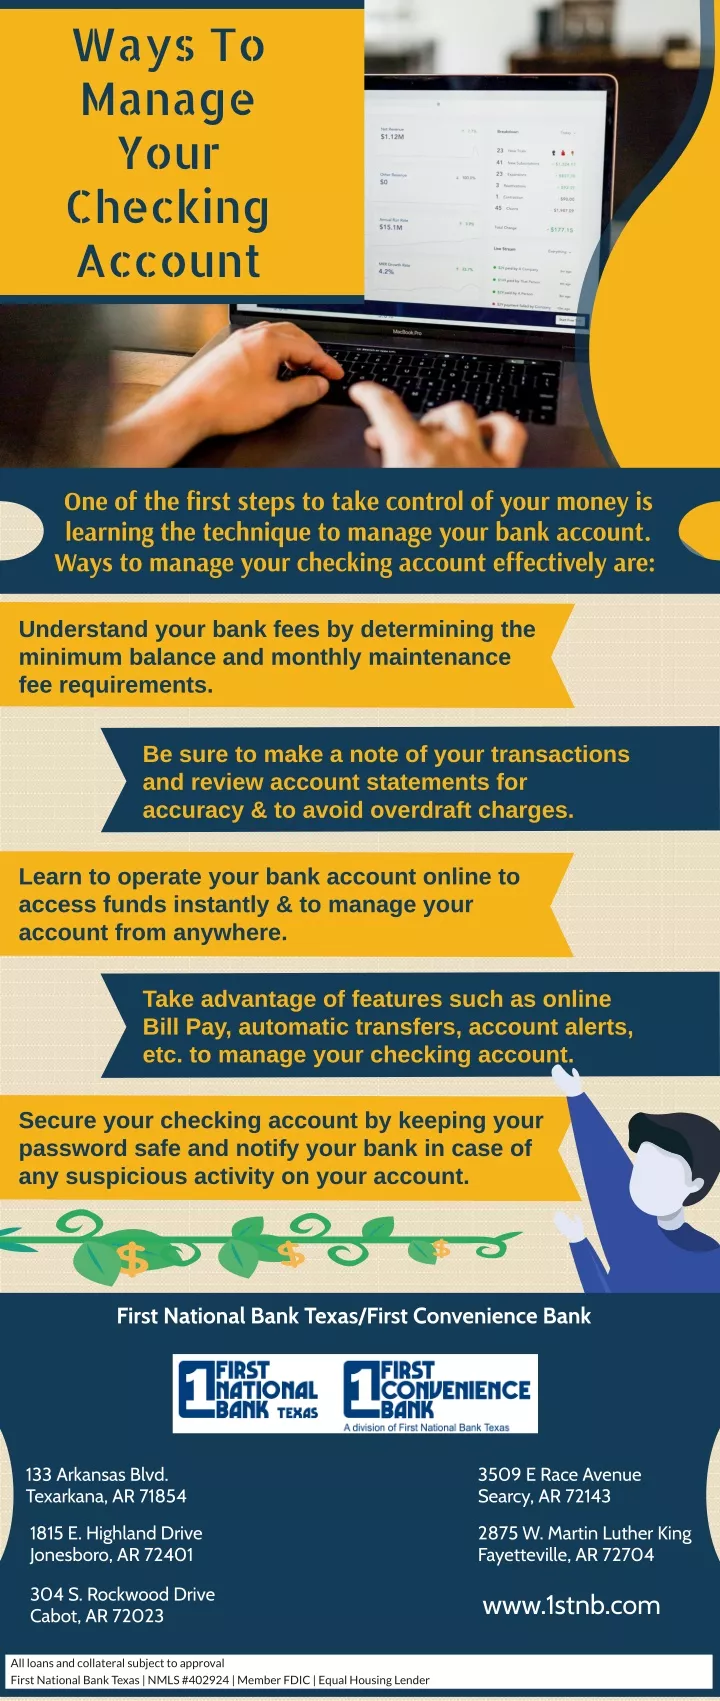 ways to manage your checking account